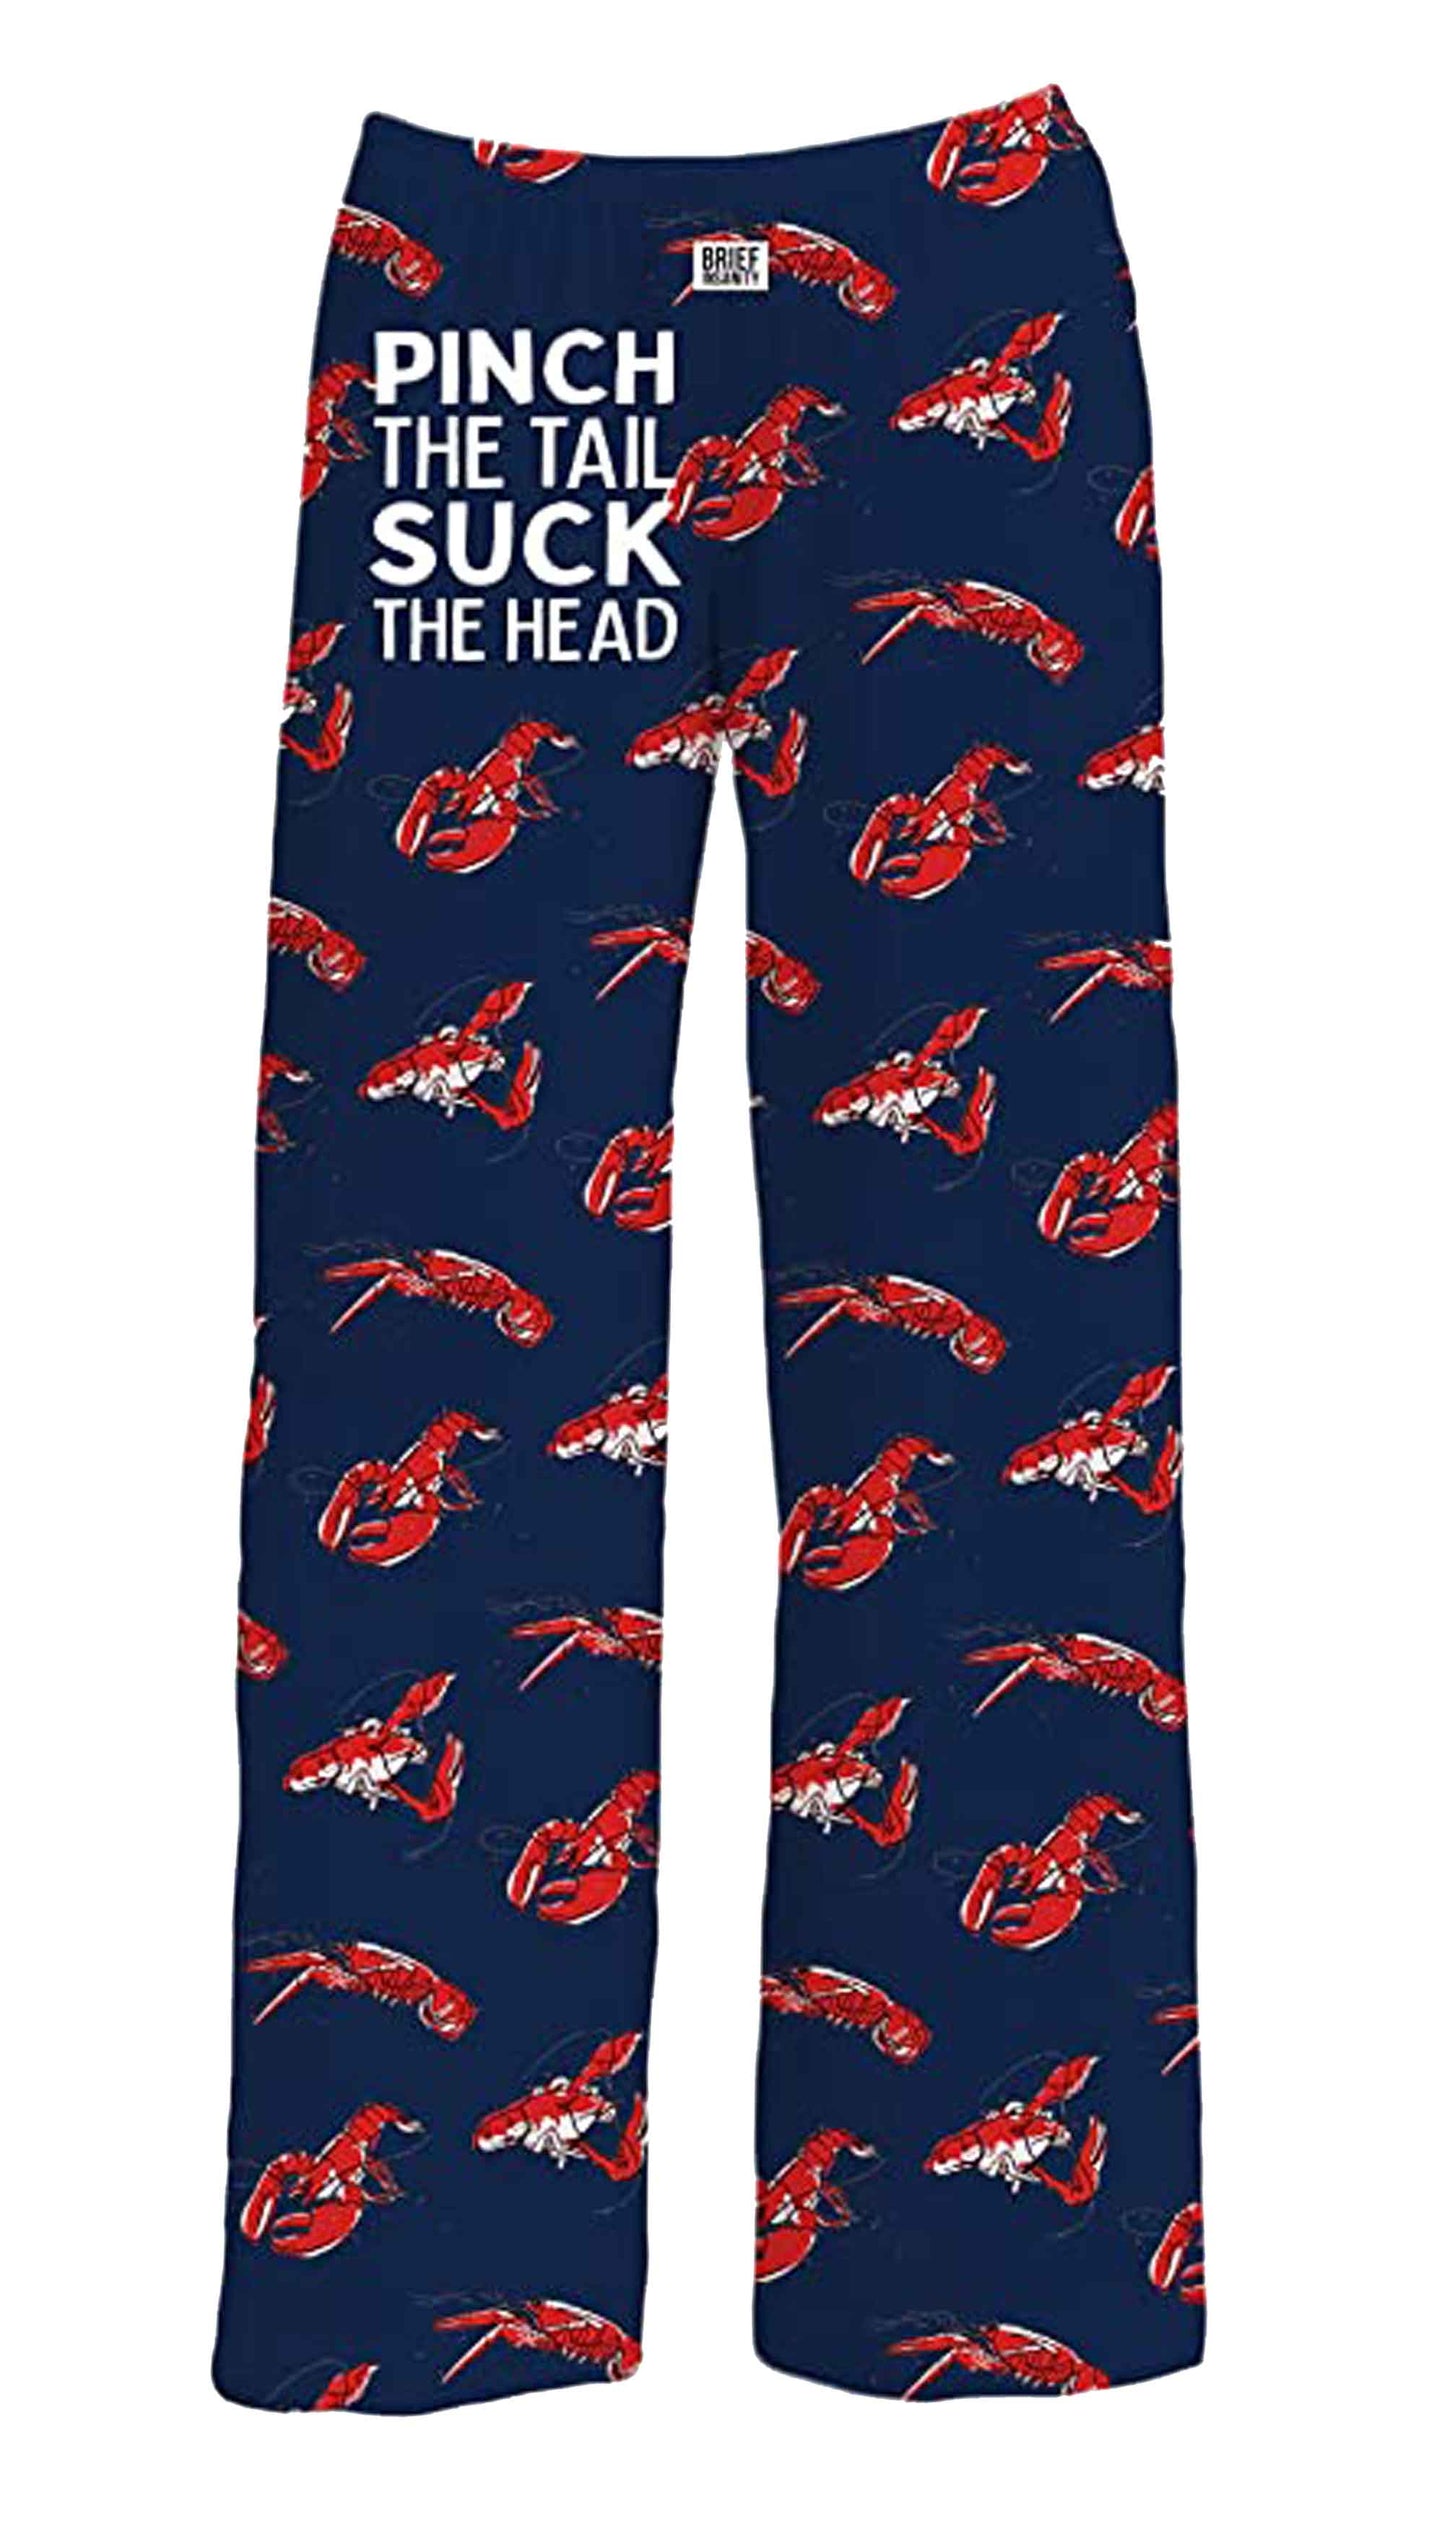 Brief Insanity Crayfish-Pinch the Tail Suck the Head Unisex Lounge Pant